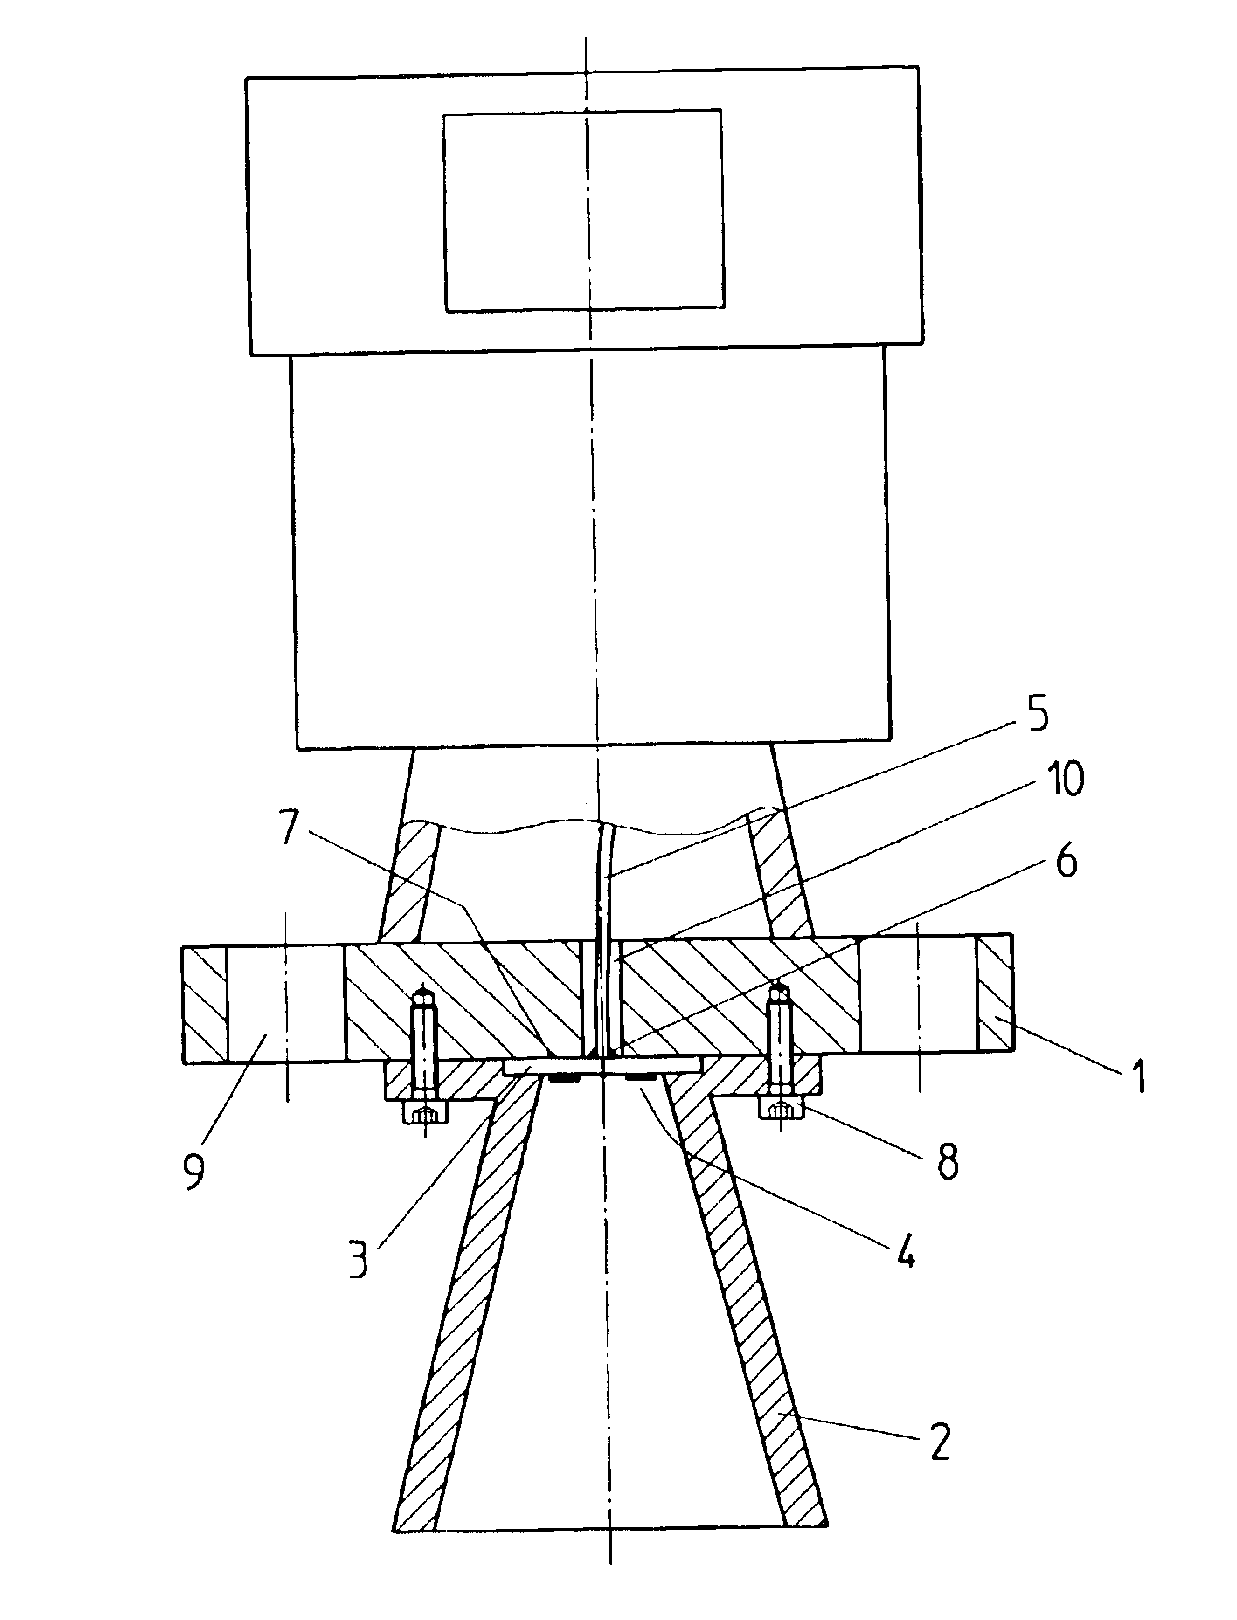 Antenna system for a level measurement apparatus